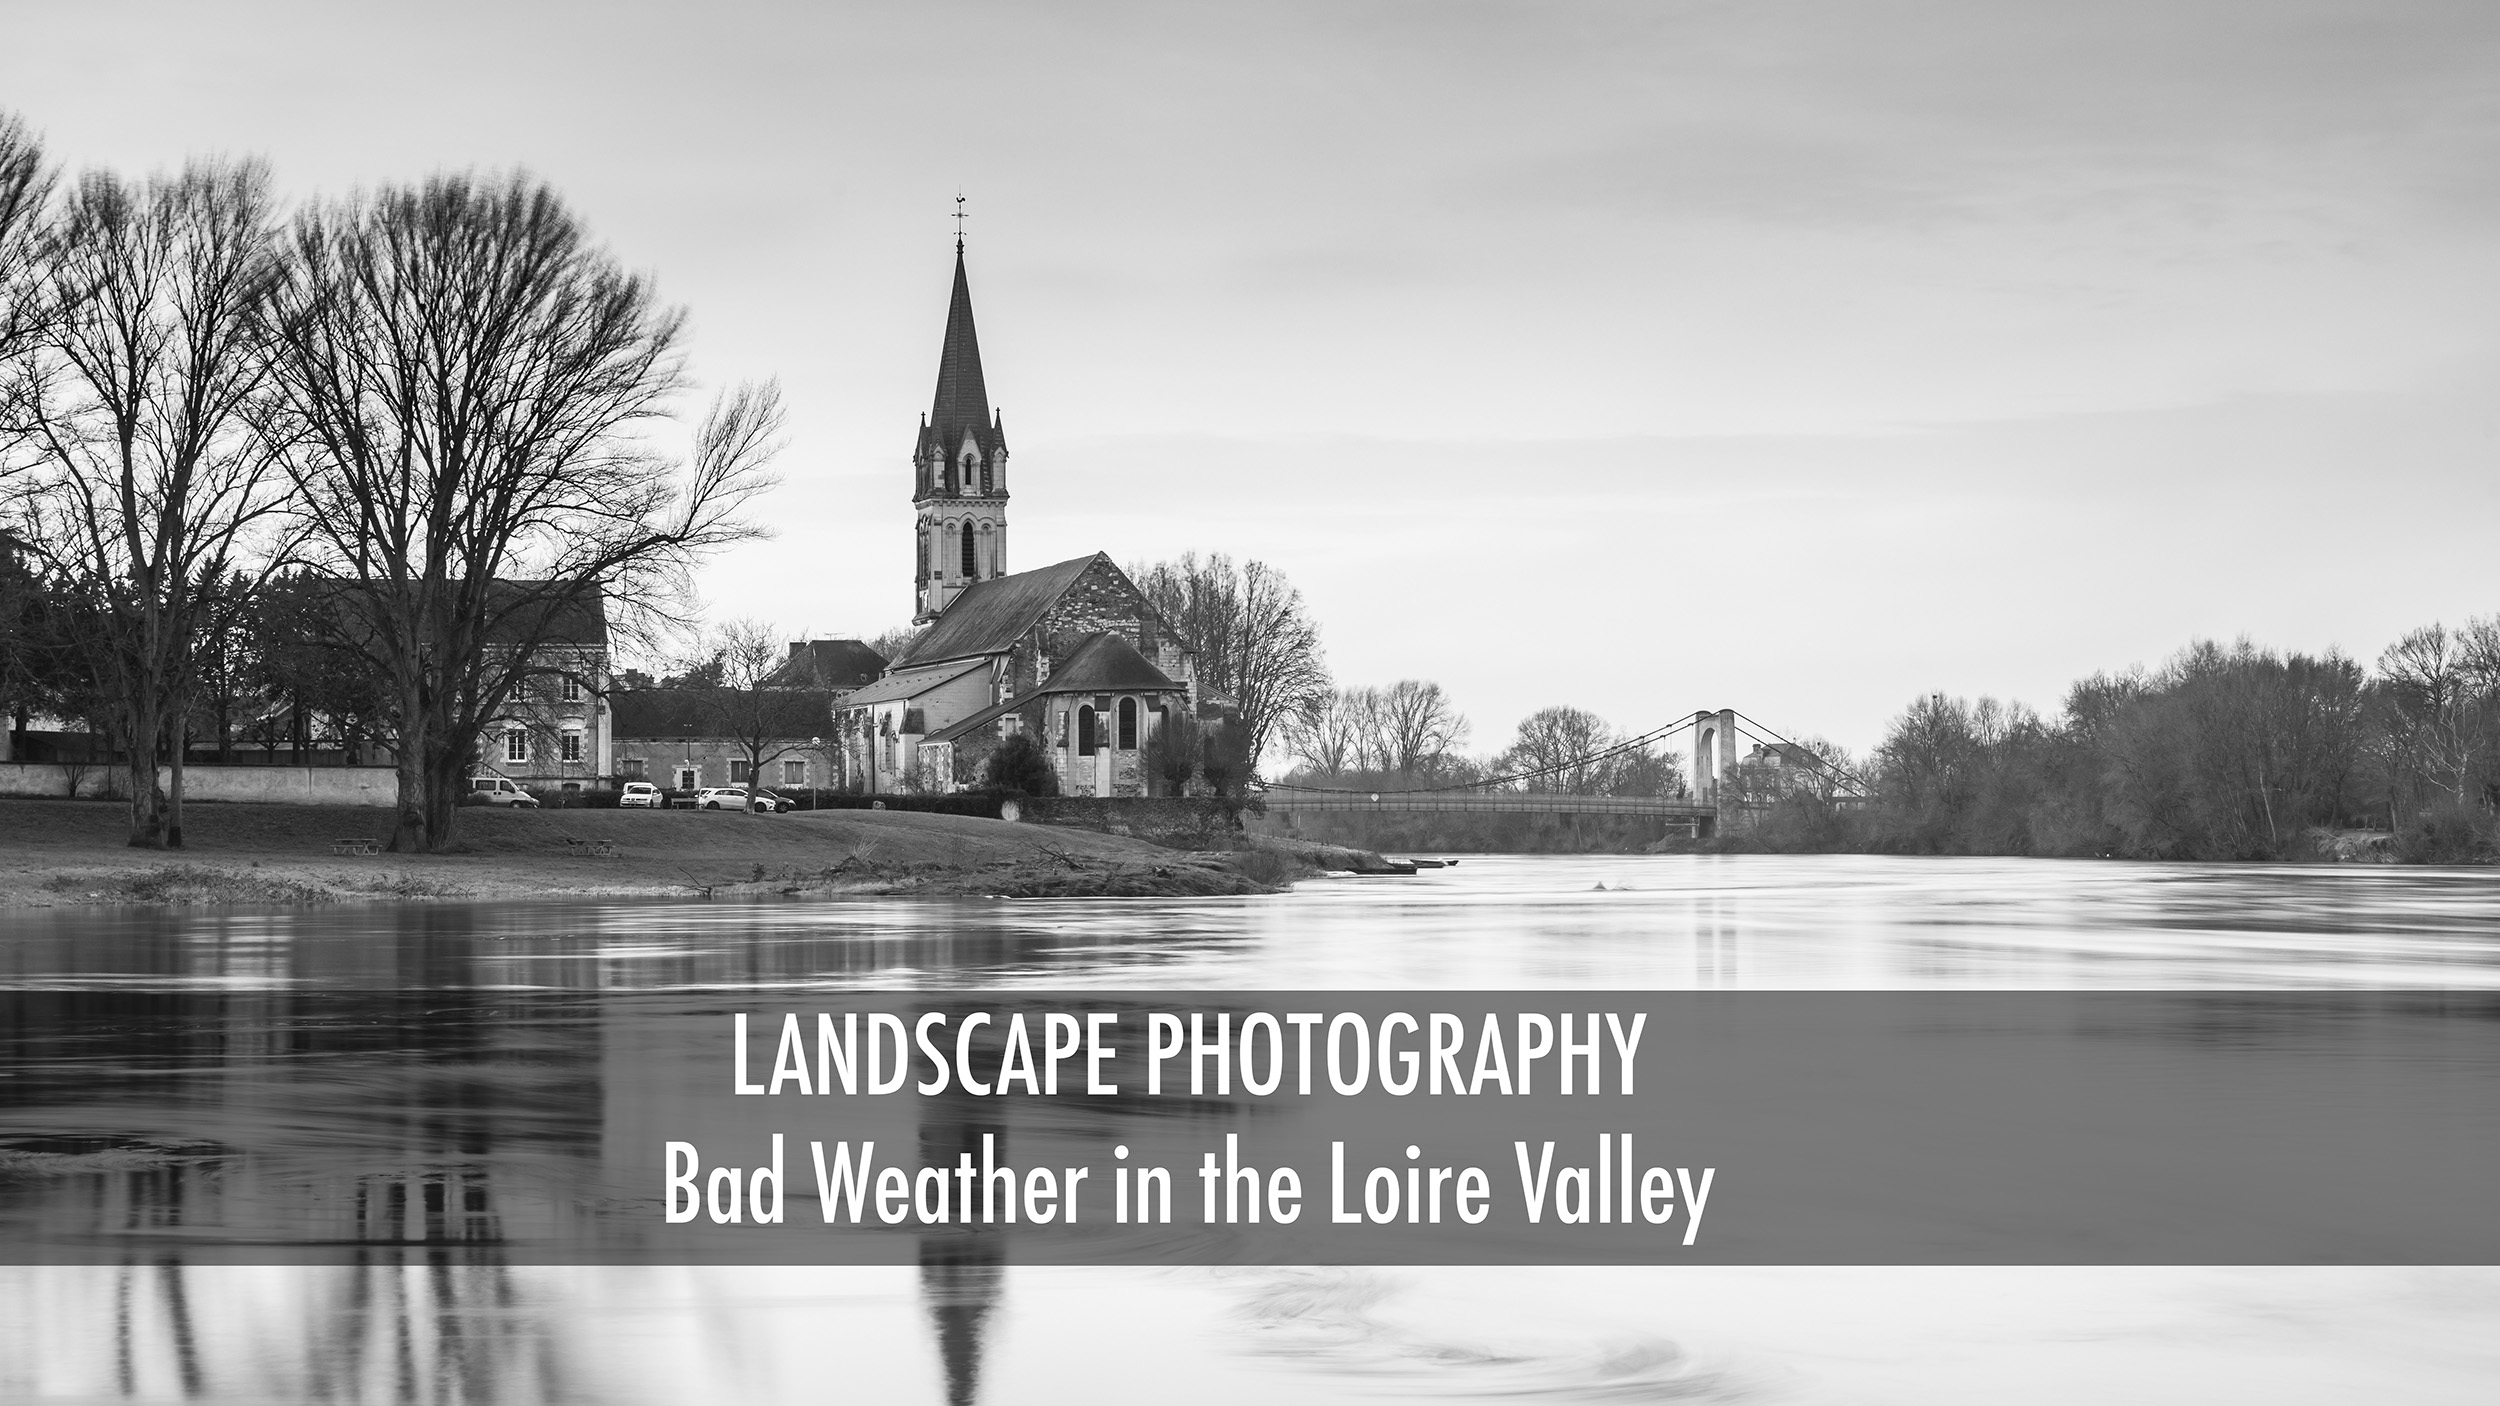 Bad weather in the Loire Valley. Landscape photography in France.